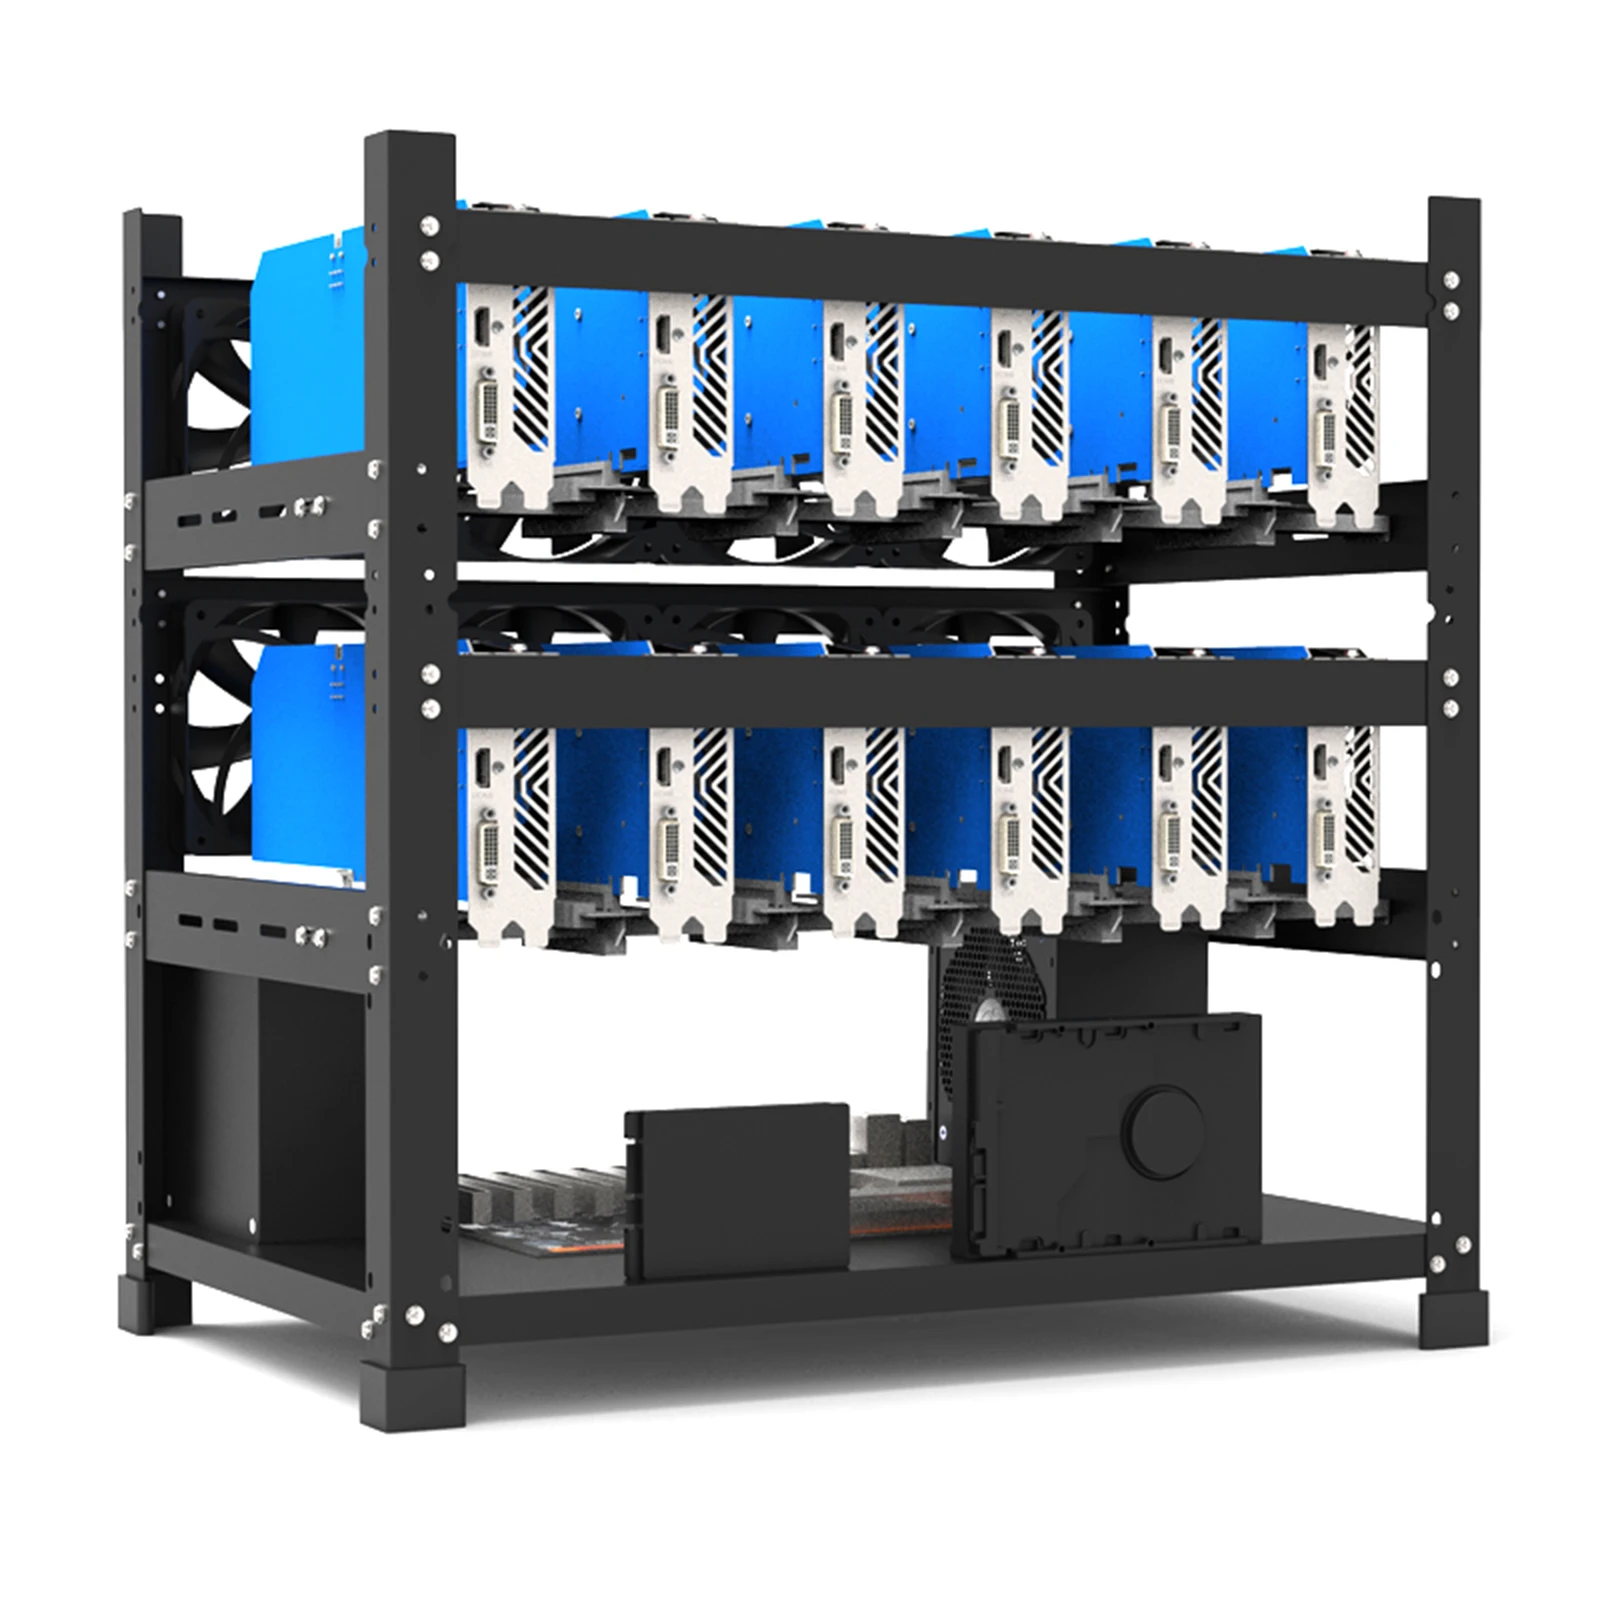 Dastrues Open Mining Rig Frame for 12 GPU Mining Case Rack Motherboard Bracket ETH/ETC/ZEC Ether Accessory Tool 3 Layers